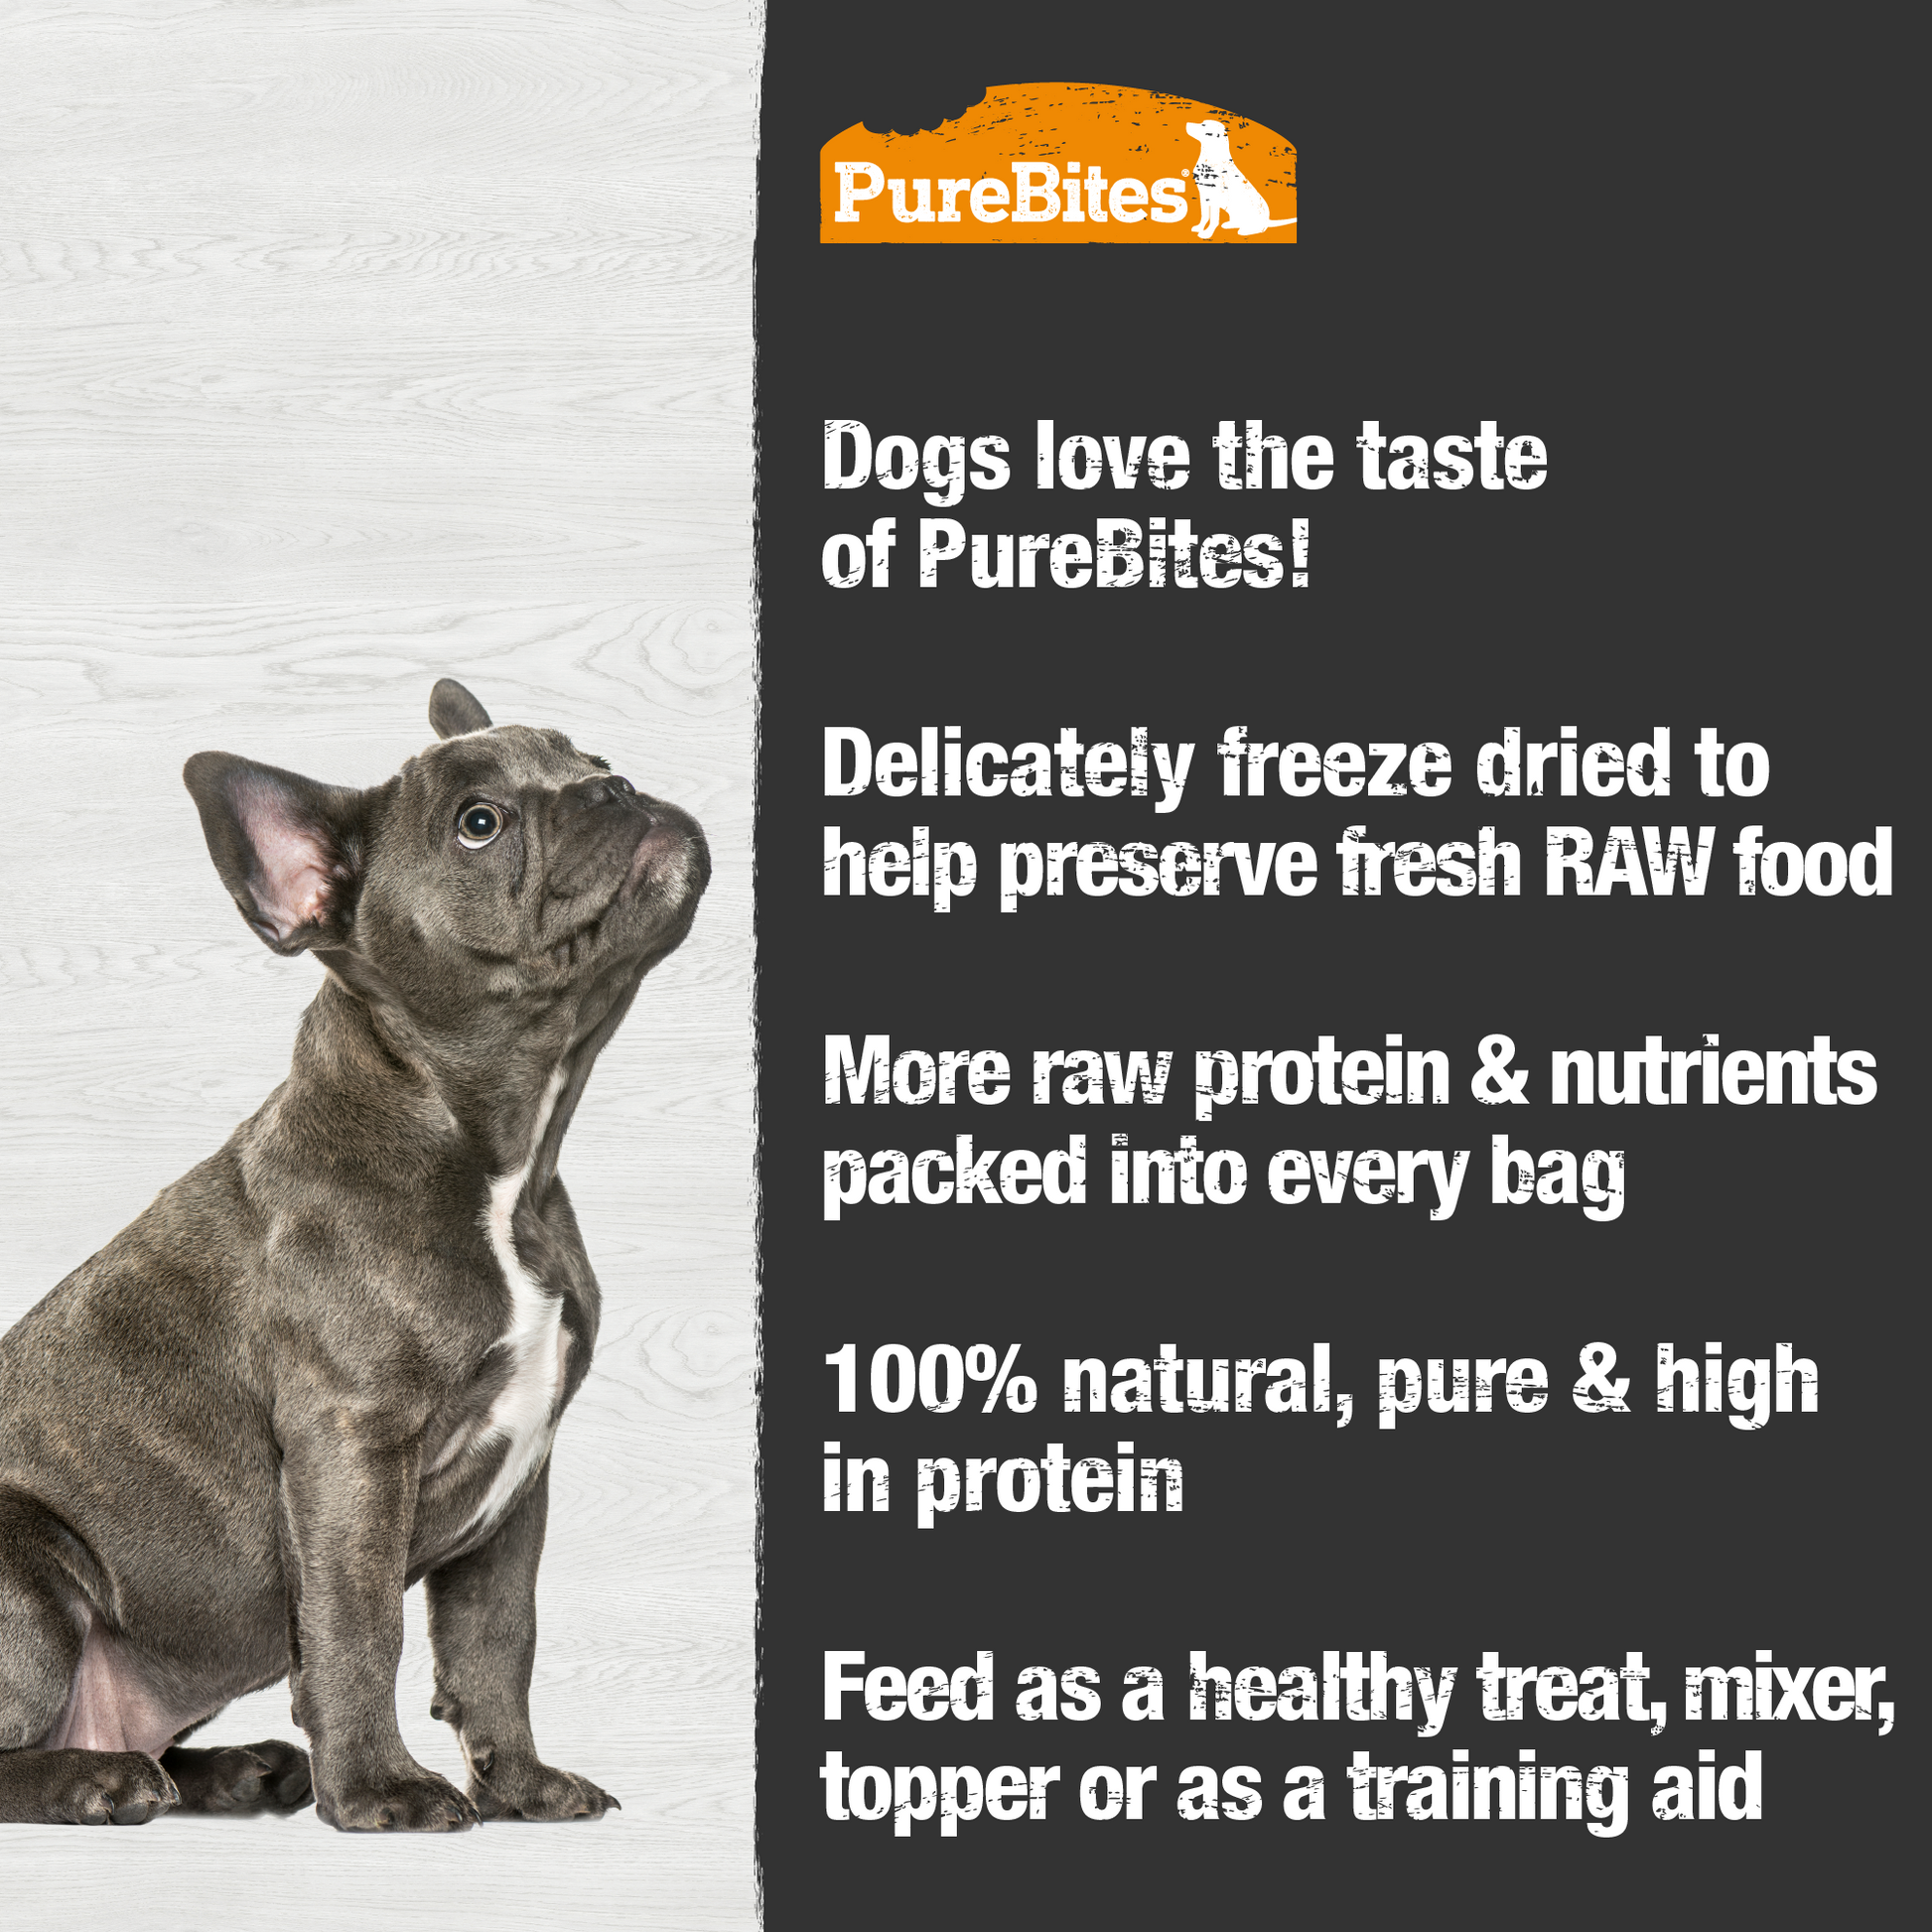 Made fresh & pure means more RAW protein and nutrients packed into every bag. Our duck liver is freeze dried to help preserve its RAW taste, and nutrition, and mirror a dog’s ancestral diet